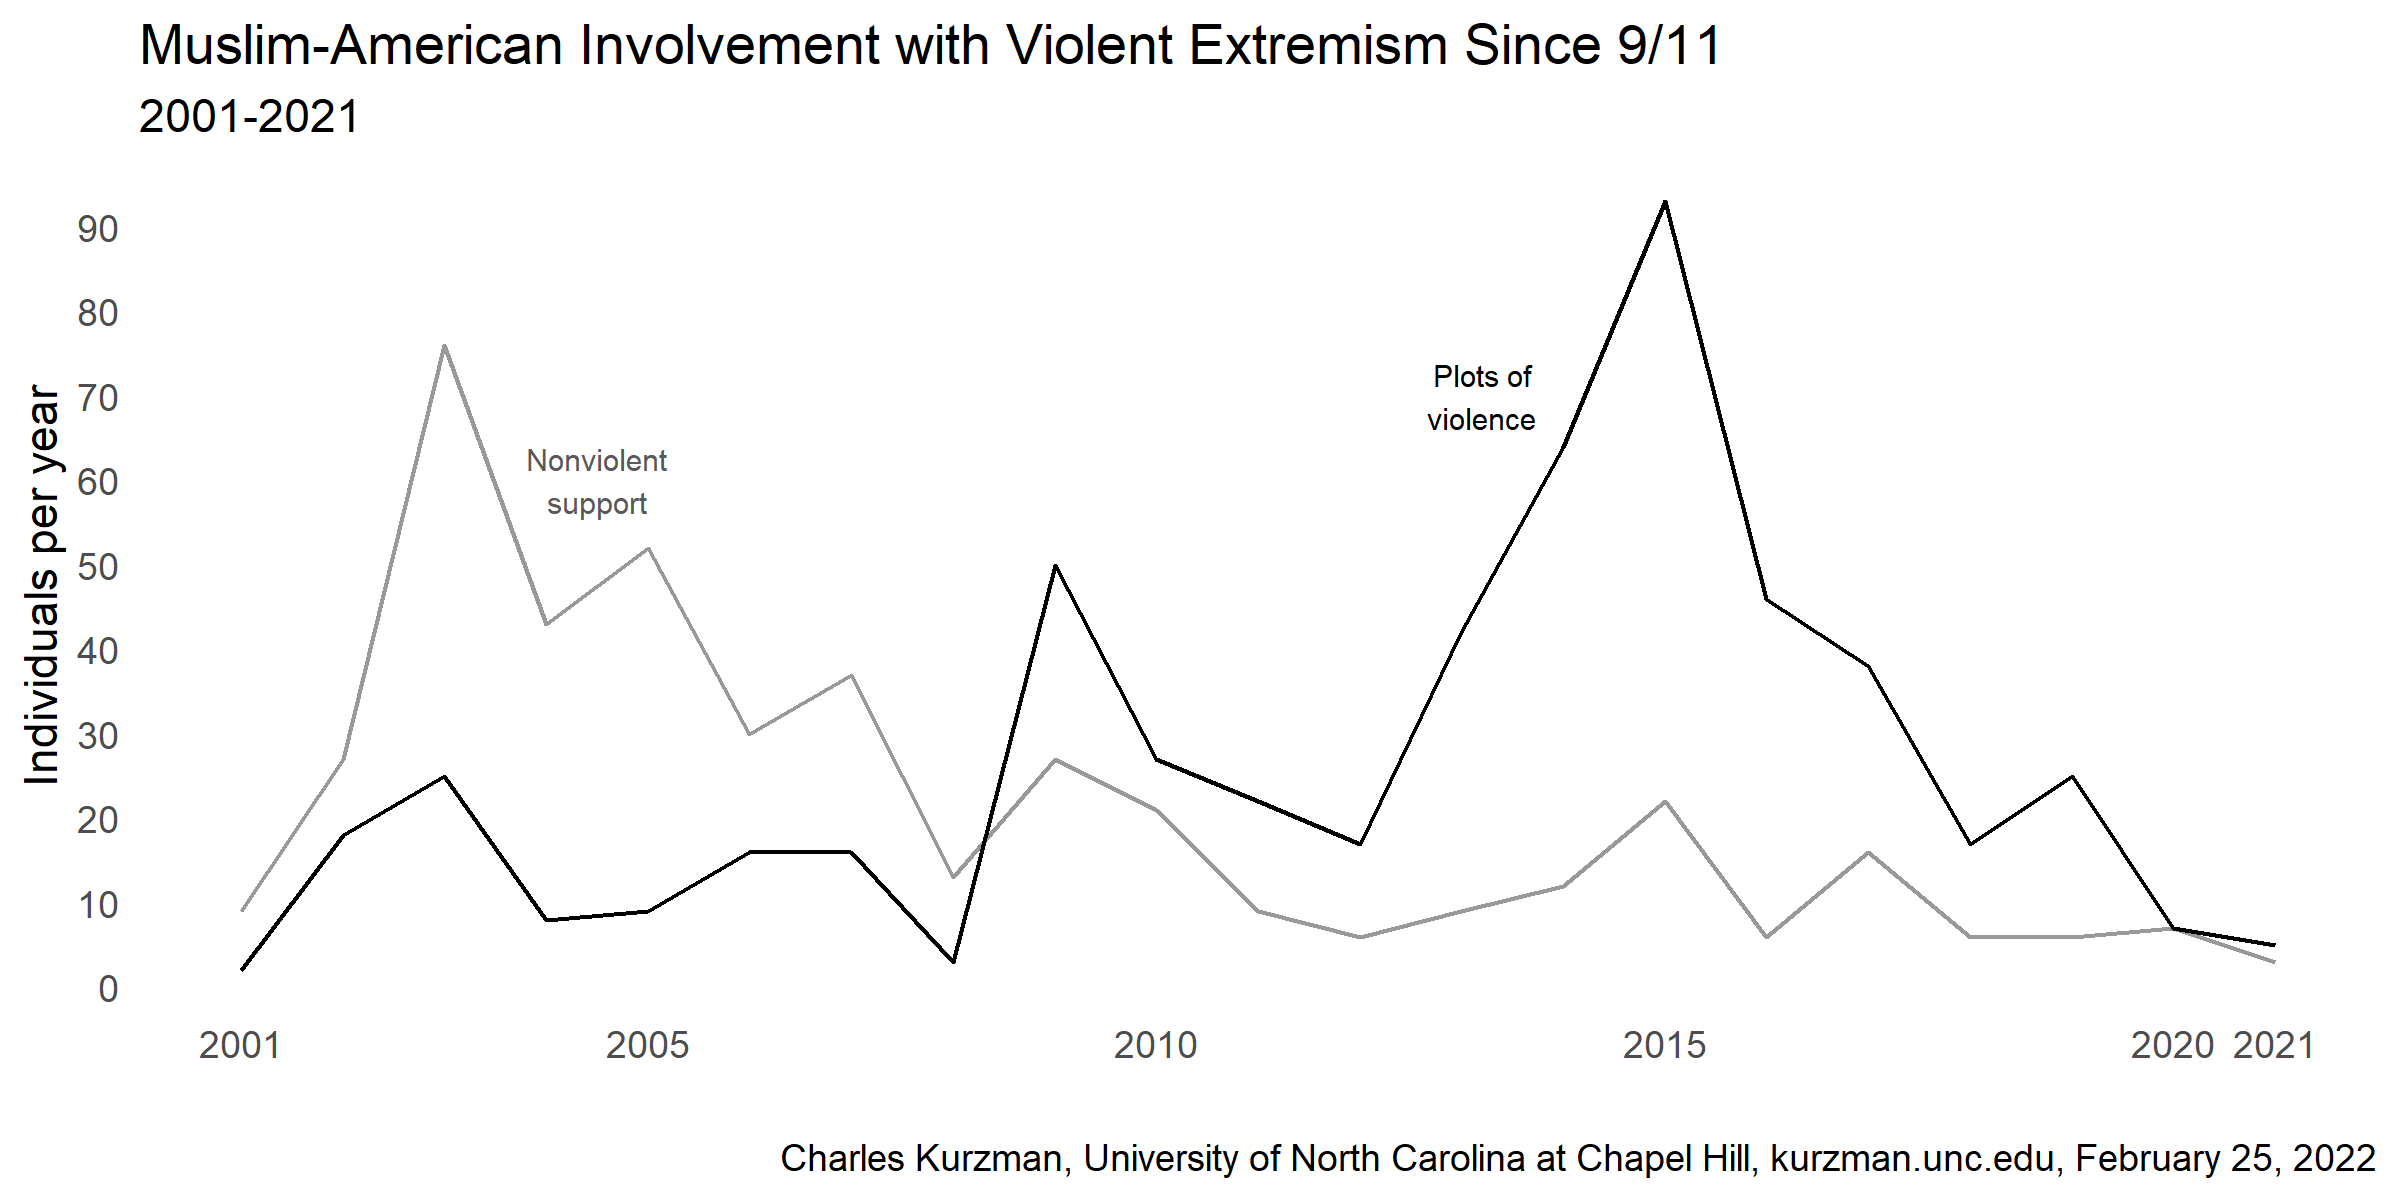 Muslim-American Involvement with Violent Extremism Since 9/11